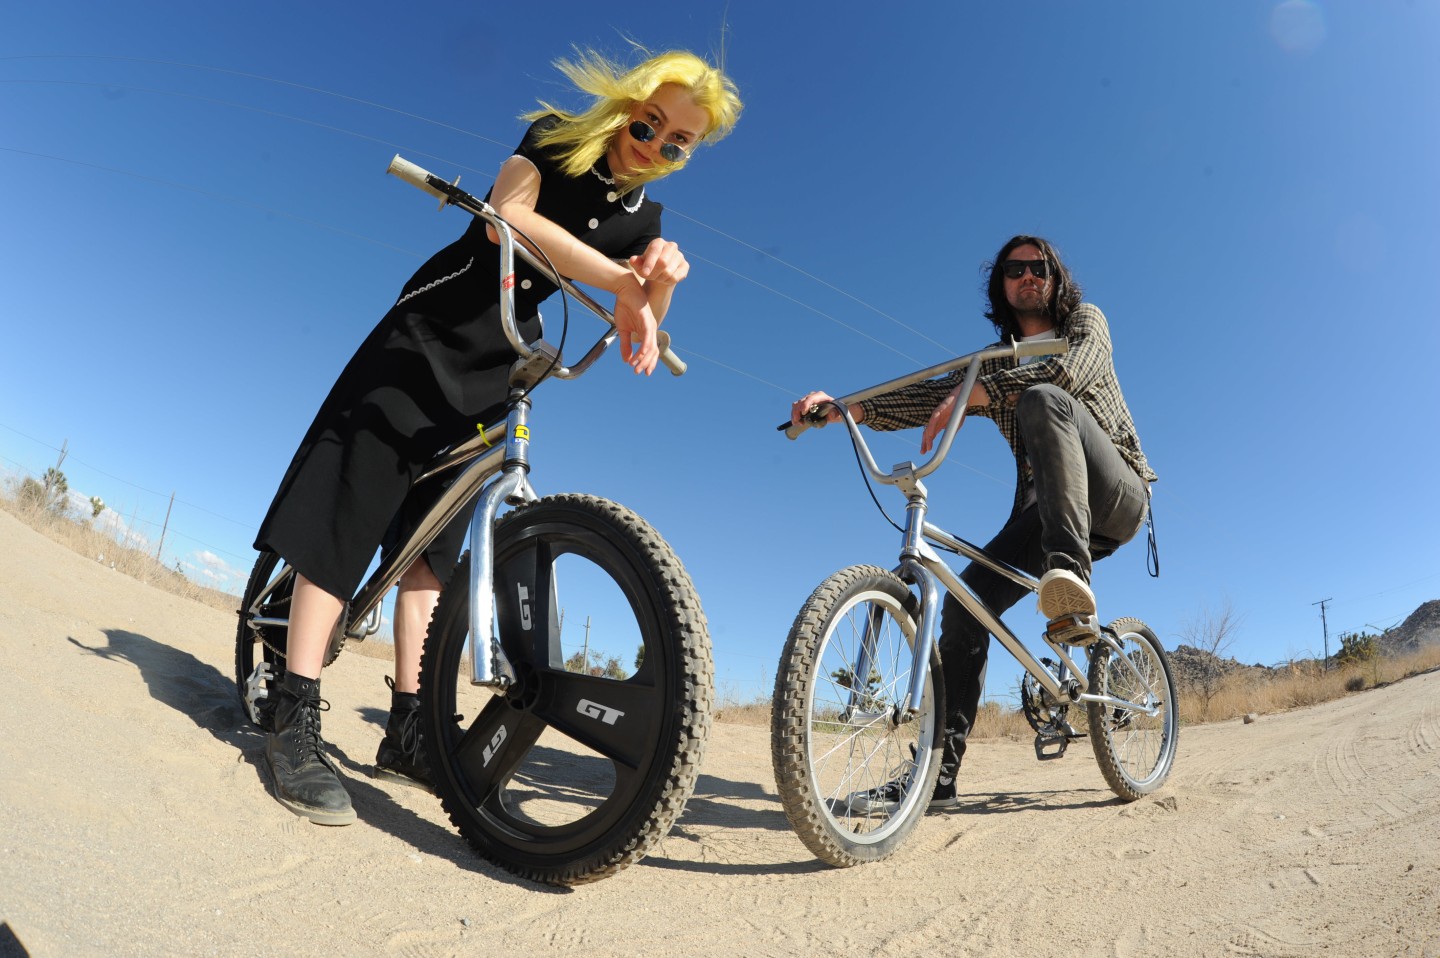 Grounded in reality with Better Oblivion Community Center